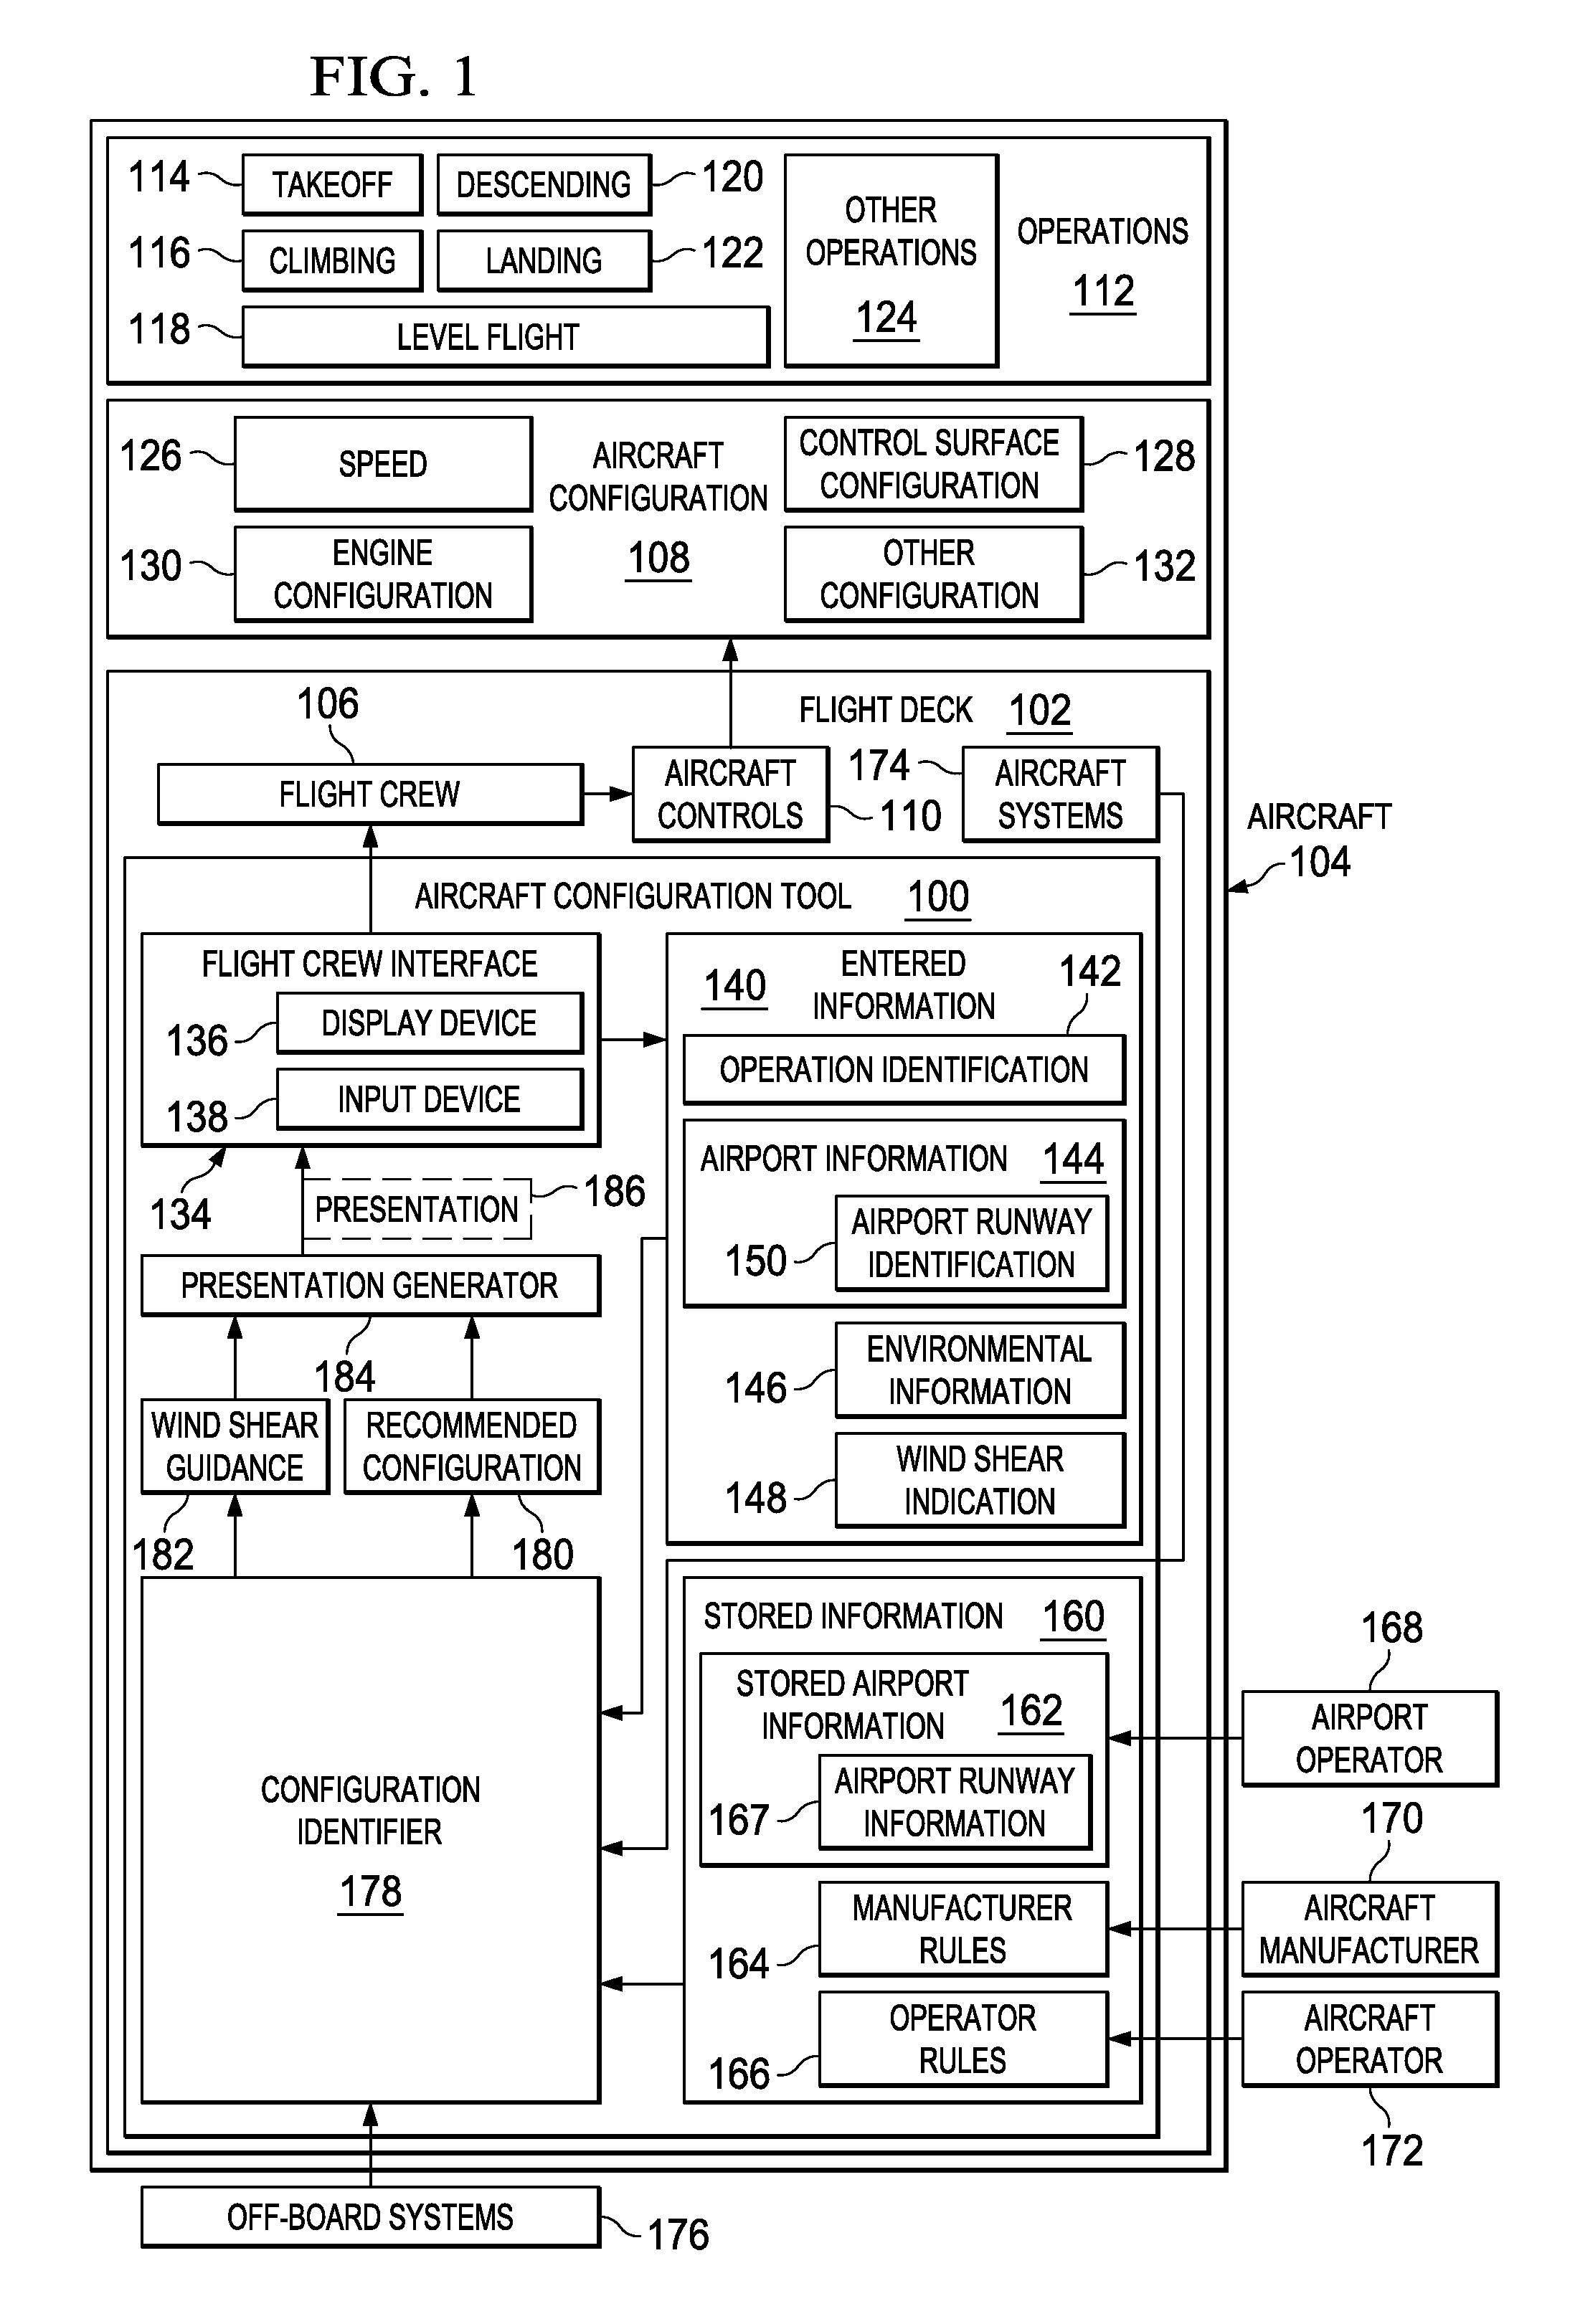 Wind shear safety performance tool